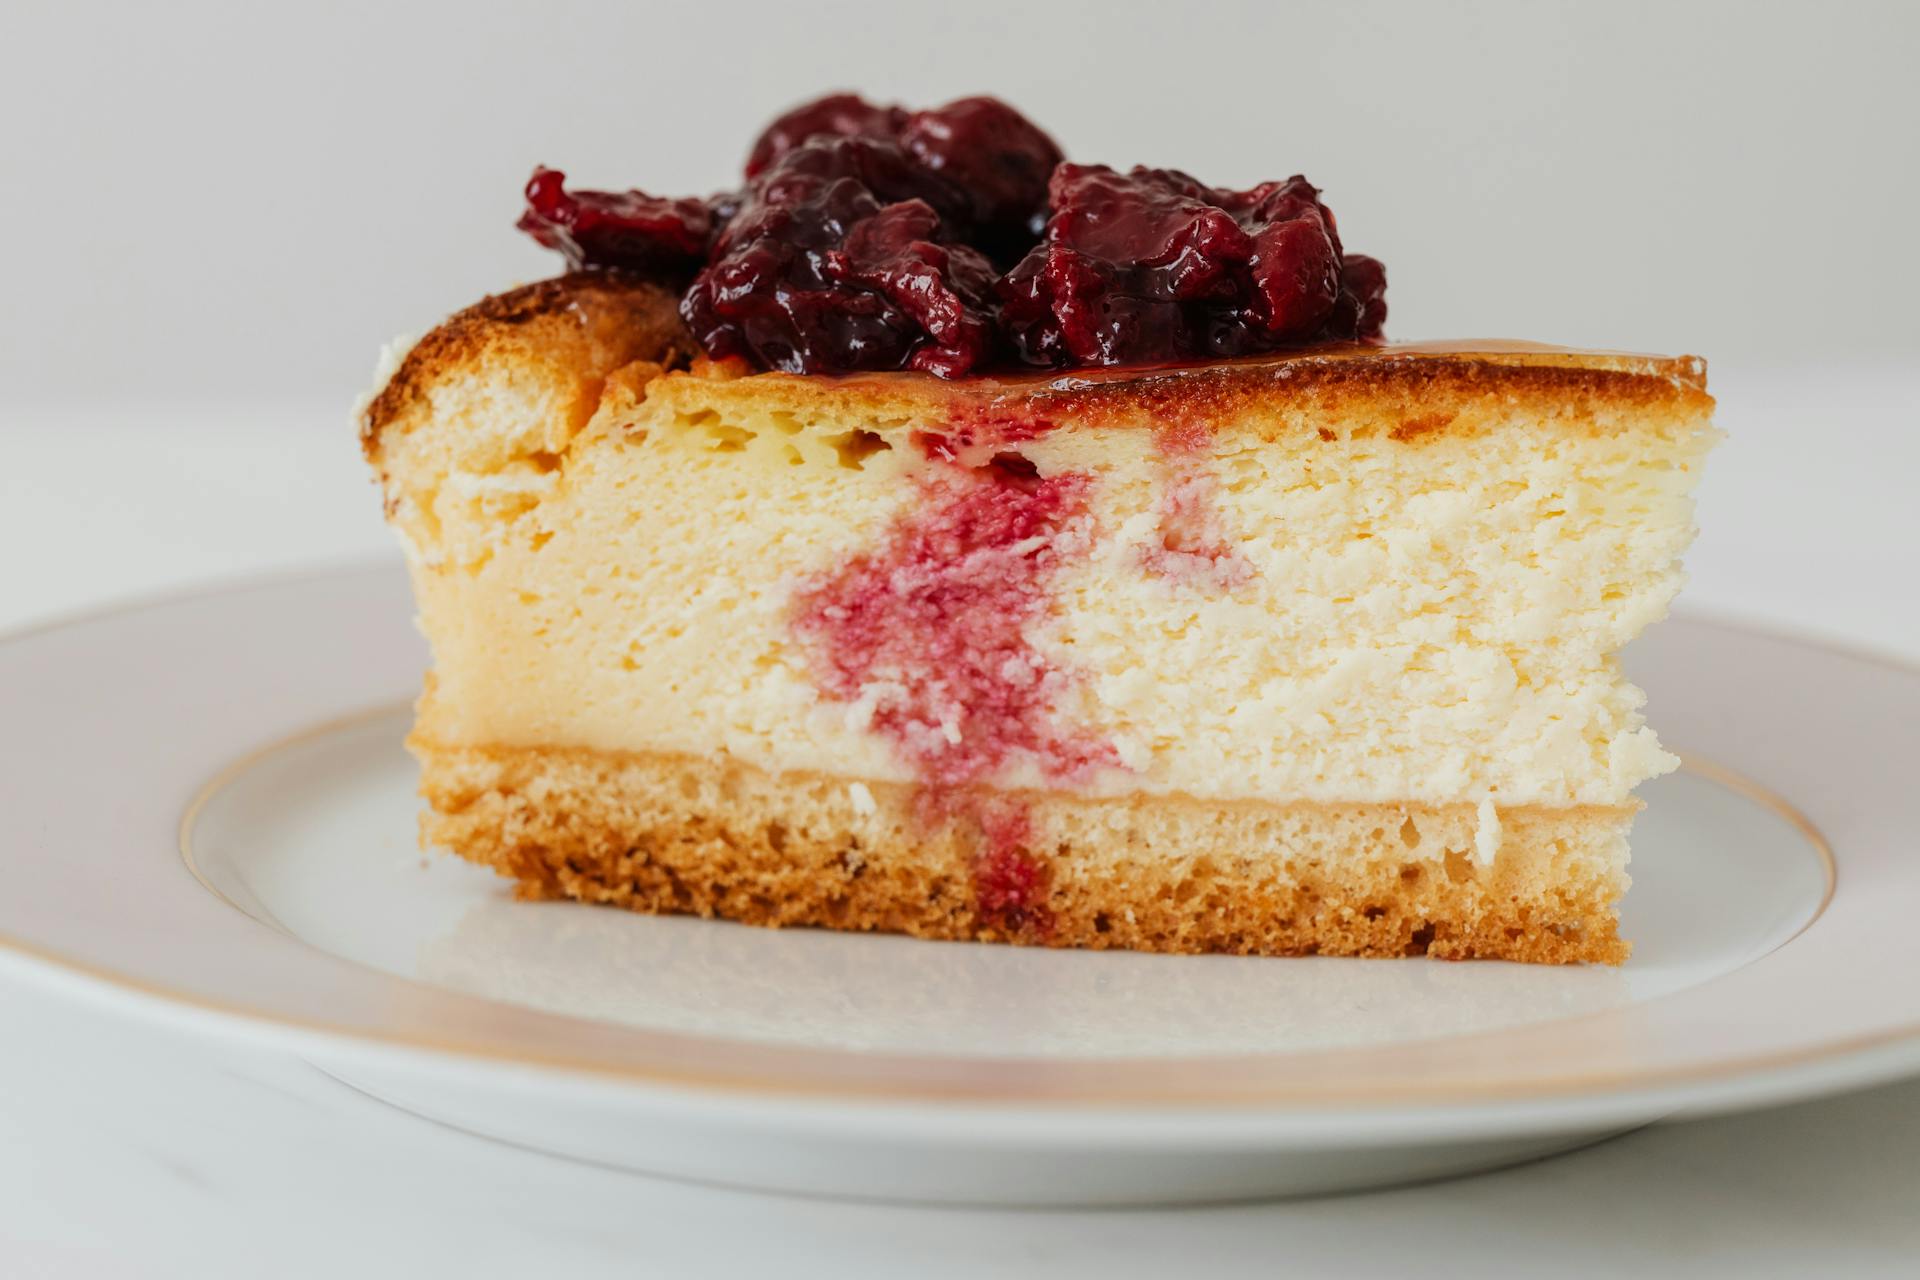 A slice of cheesecake | Source: Pexels